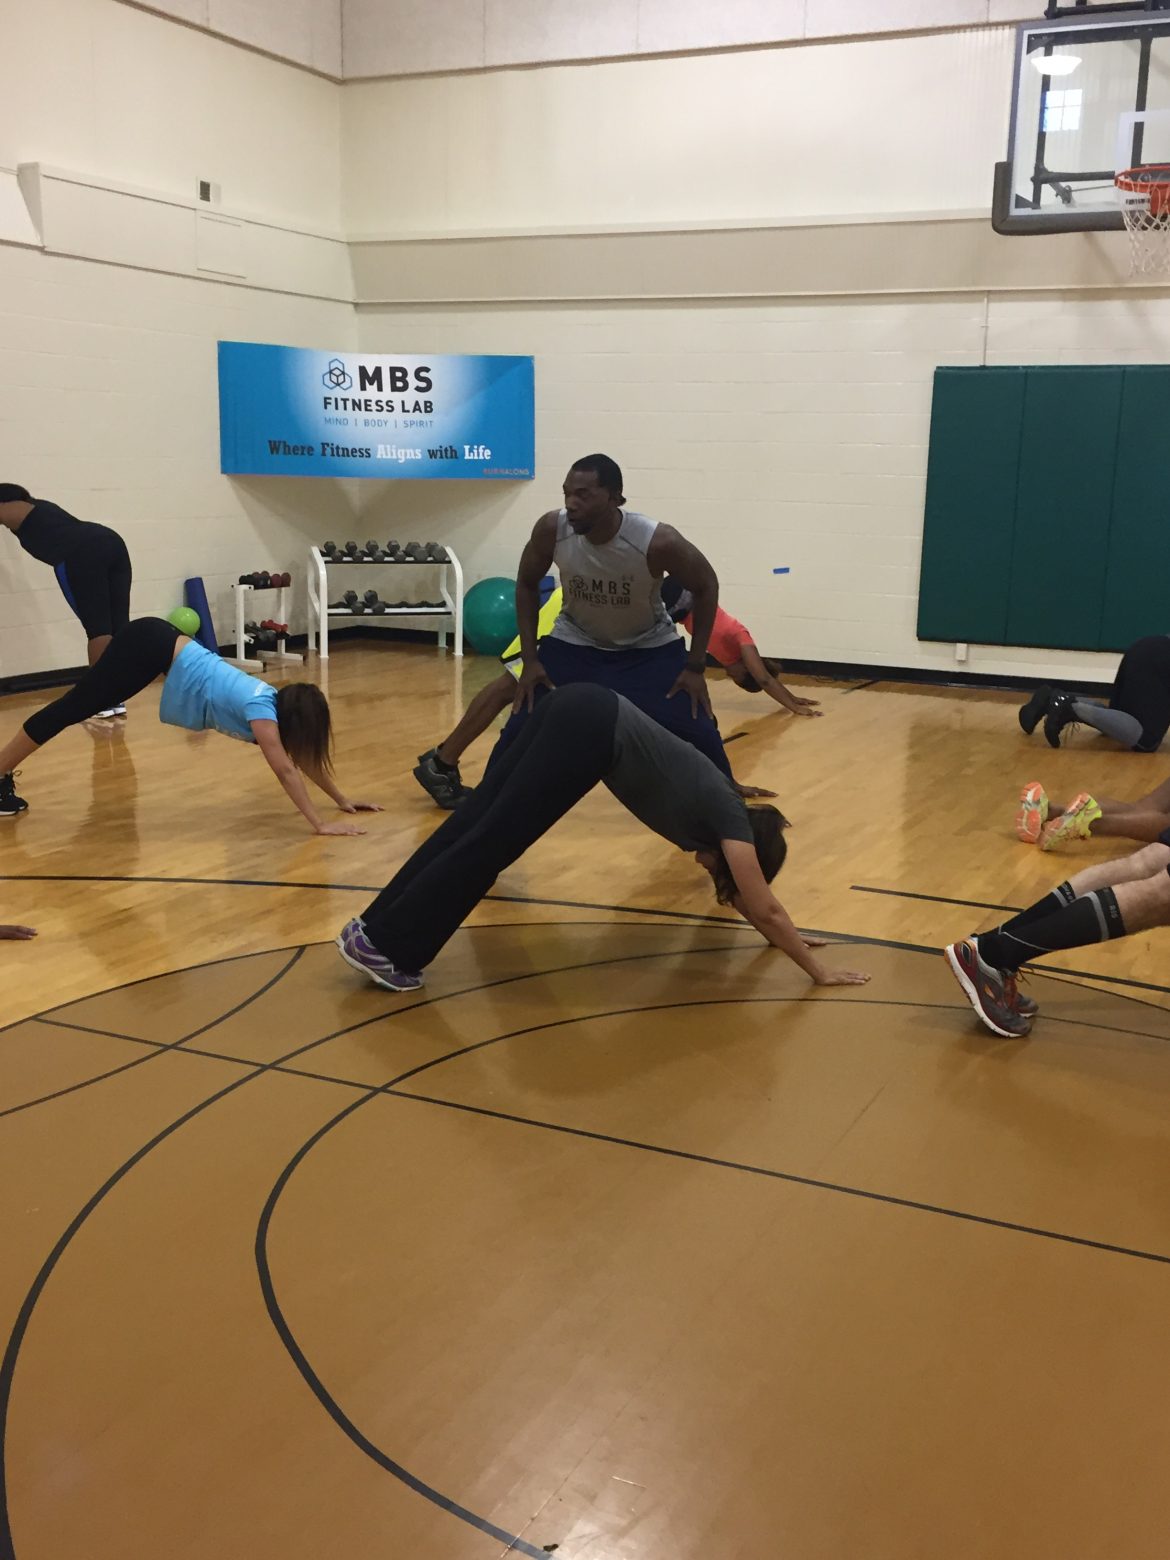 Core exercises while getting coached in gym